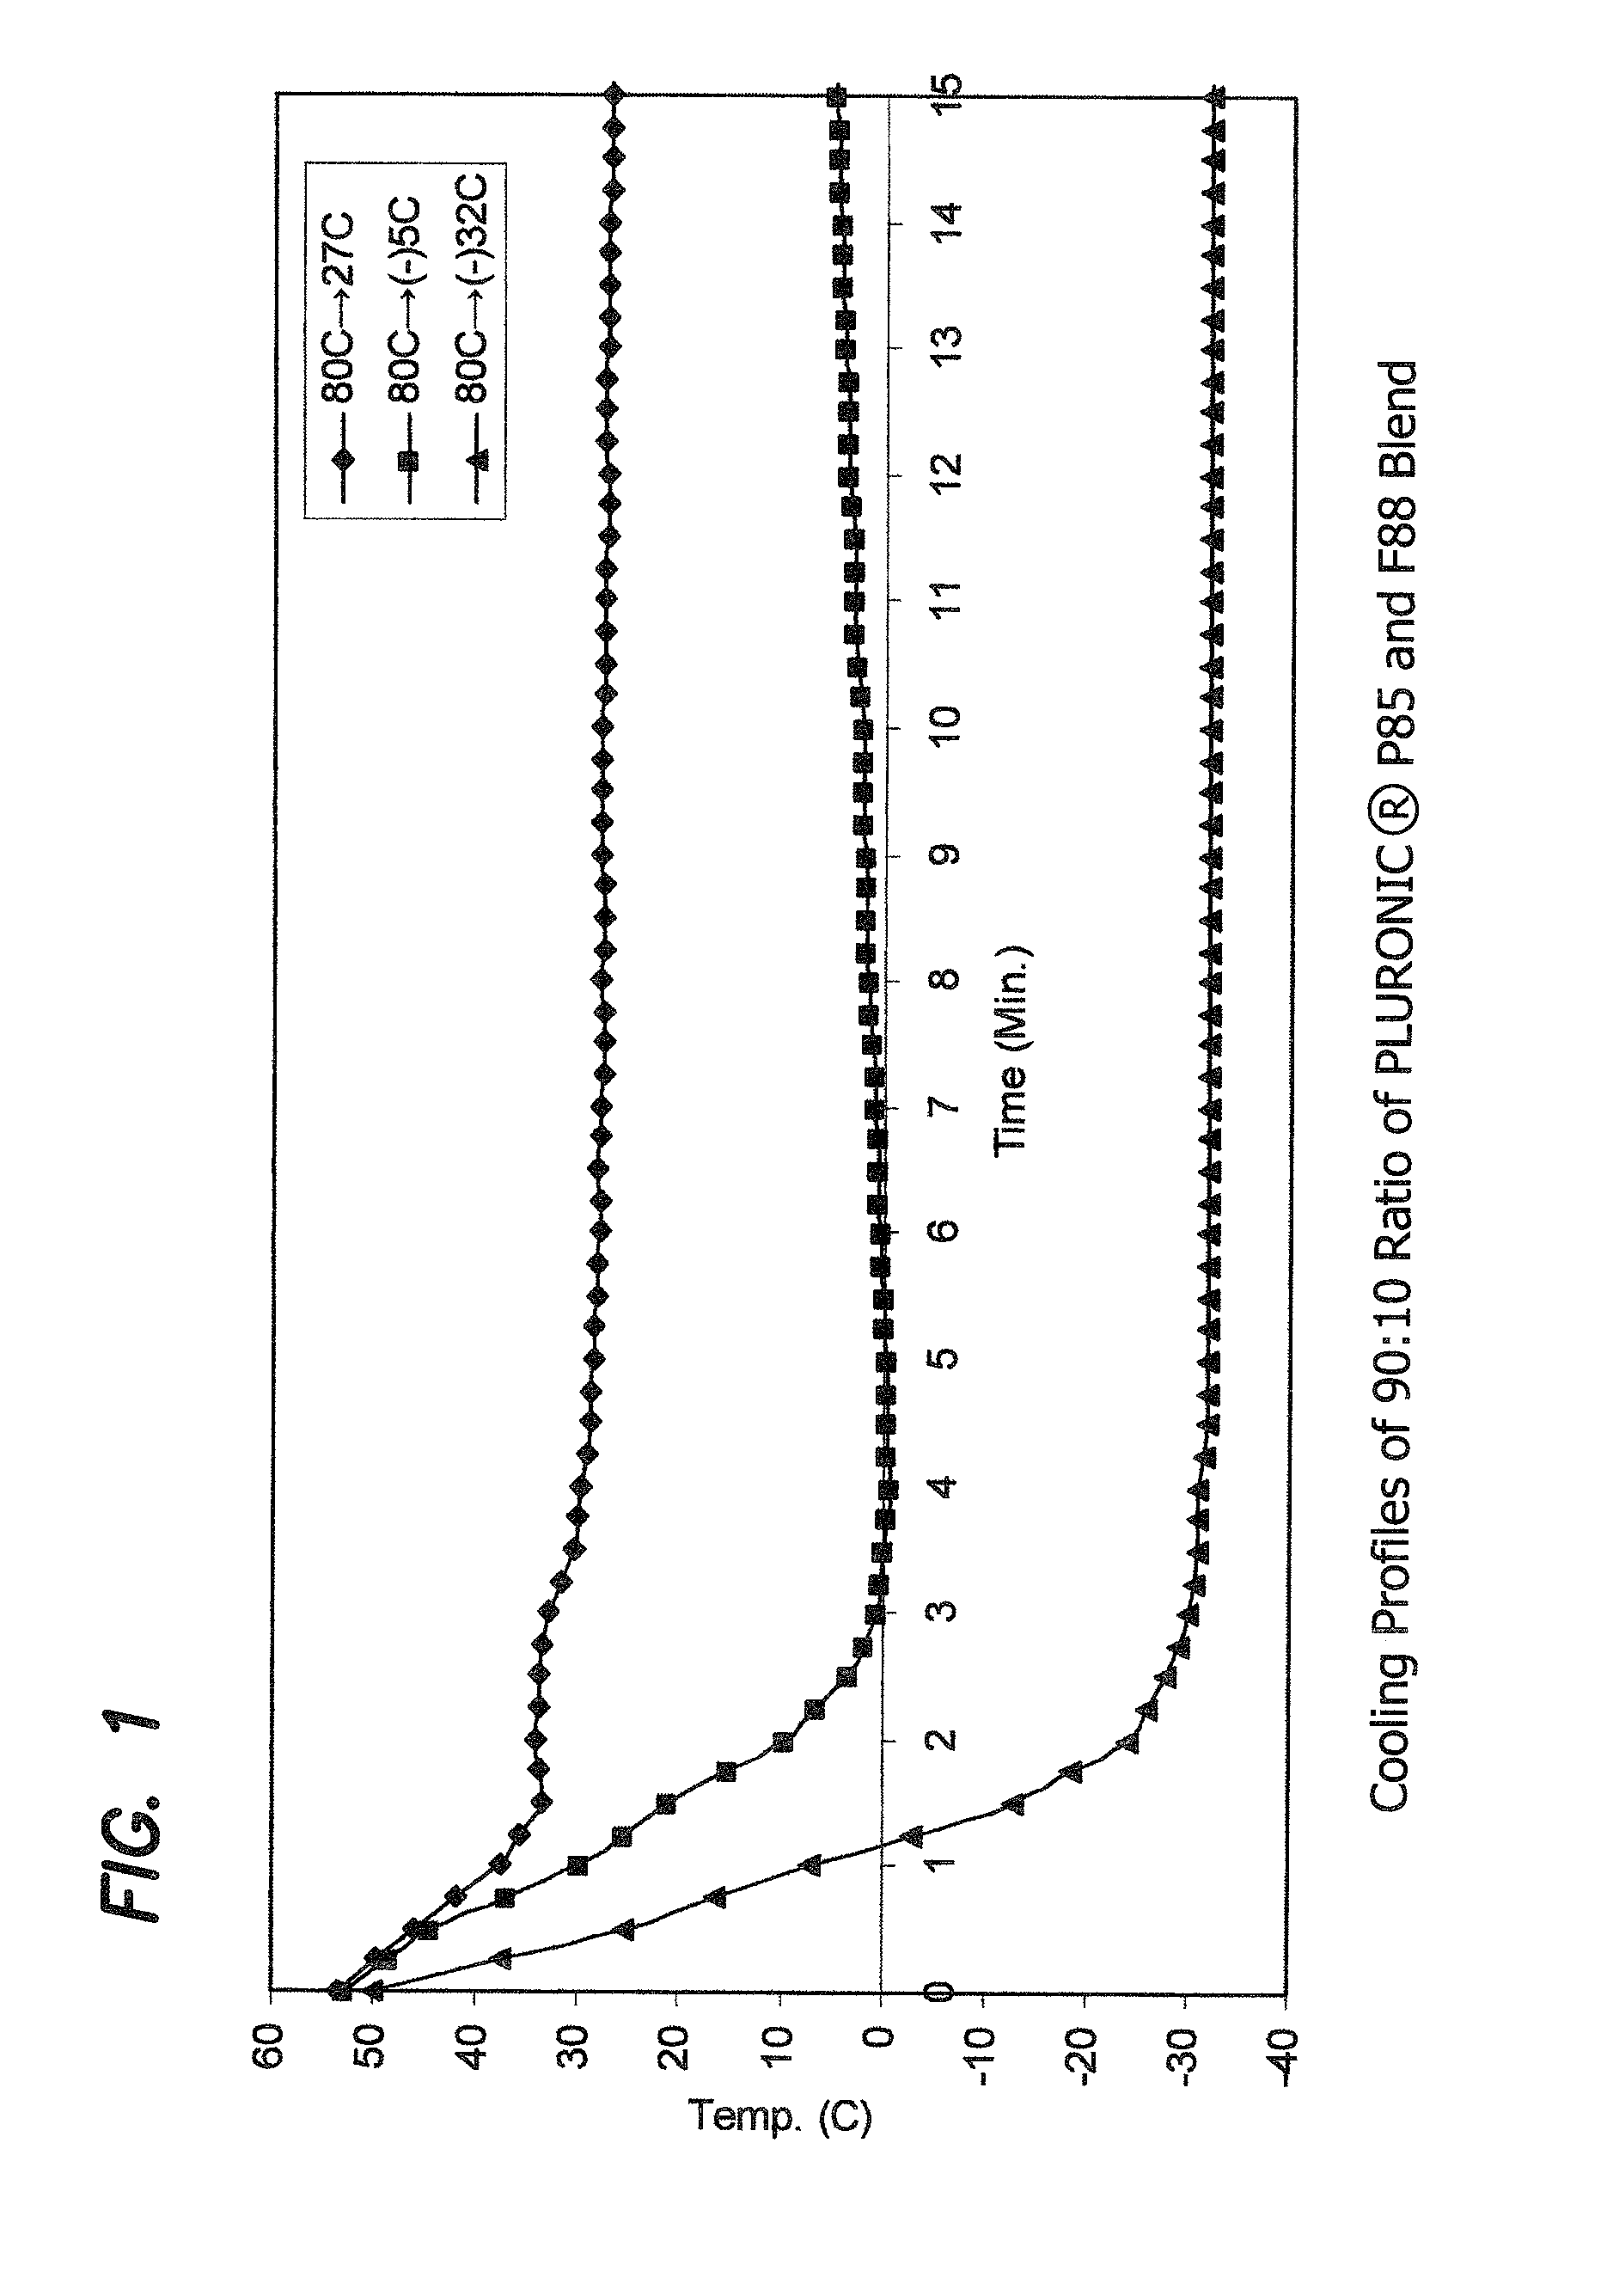 Biocompatible polymeric compositions having microcrystalline and amorphous components and methods for their manufacture